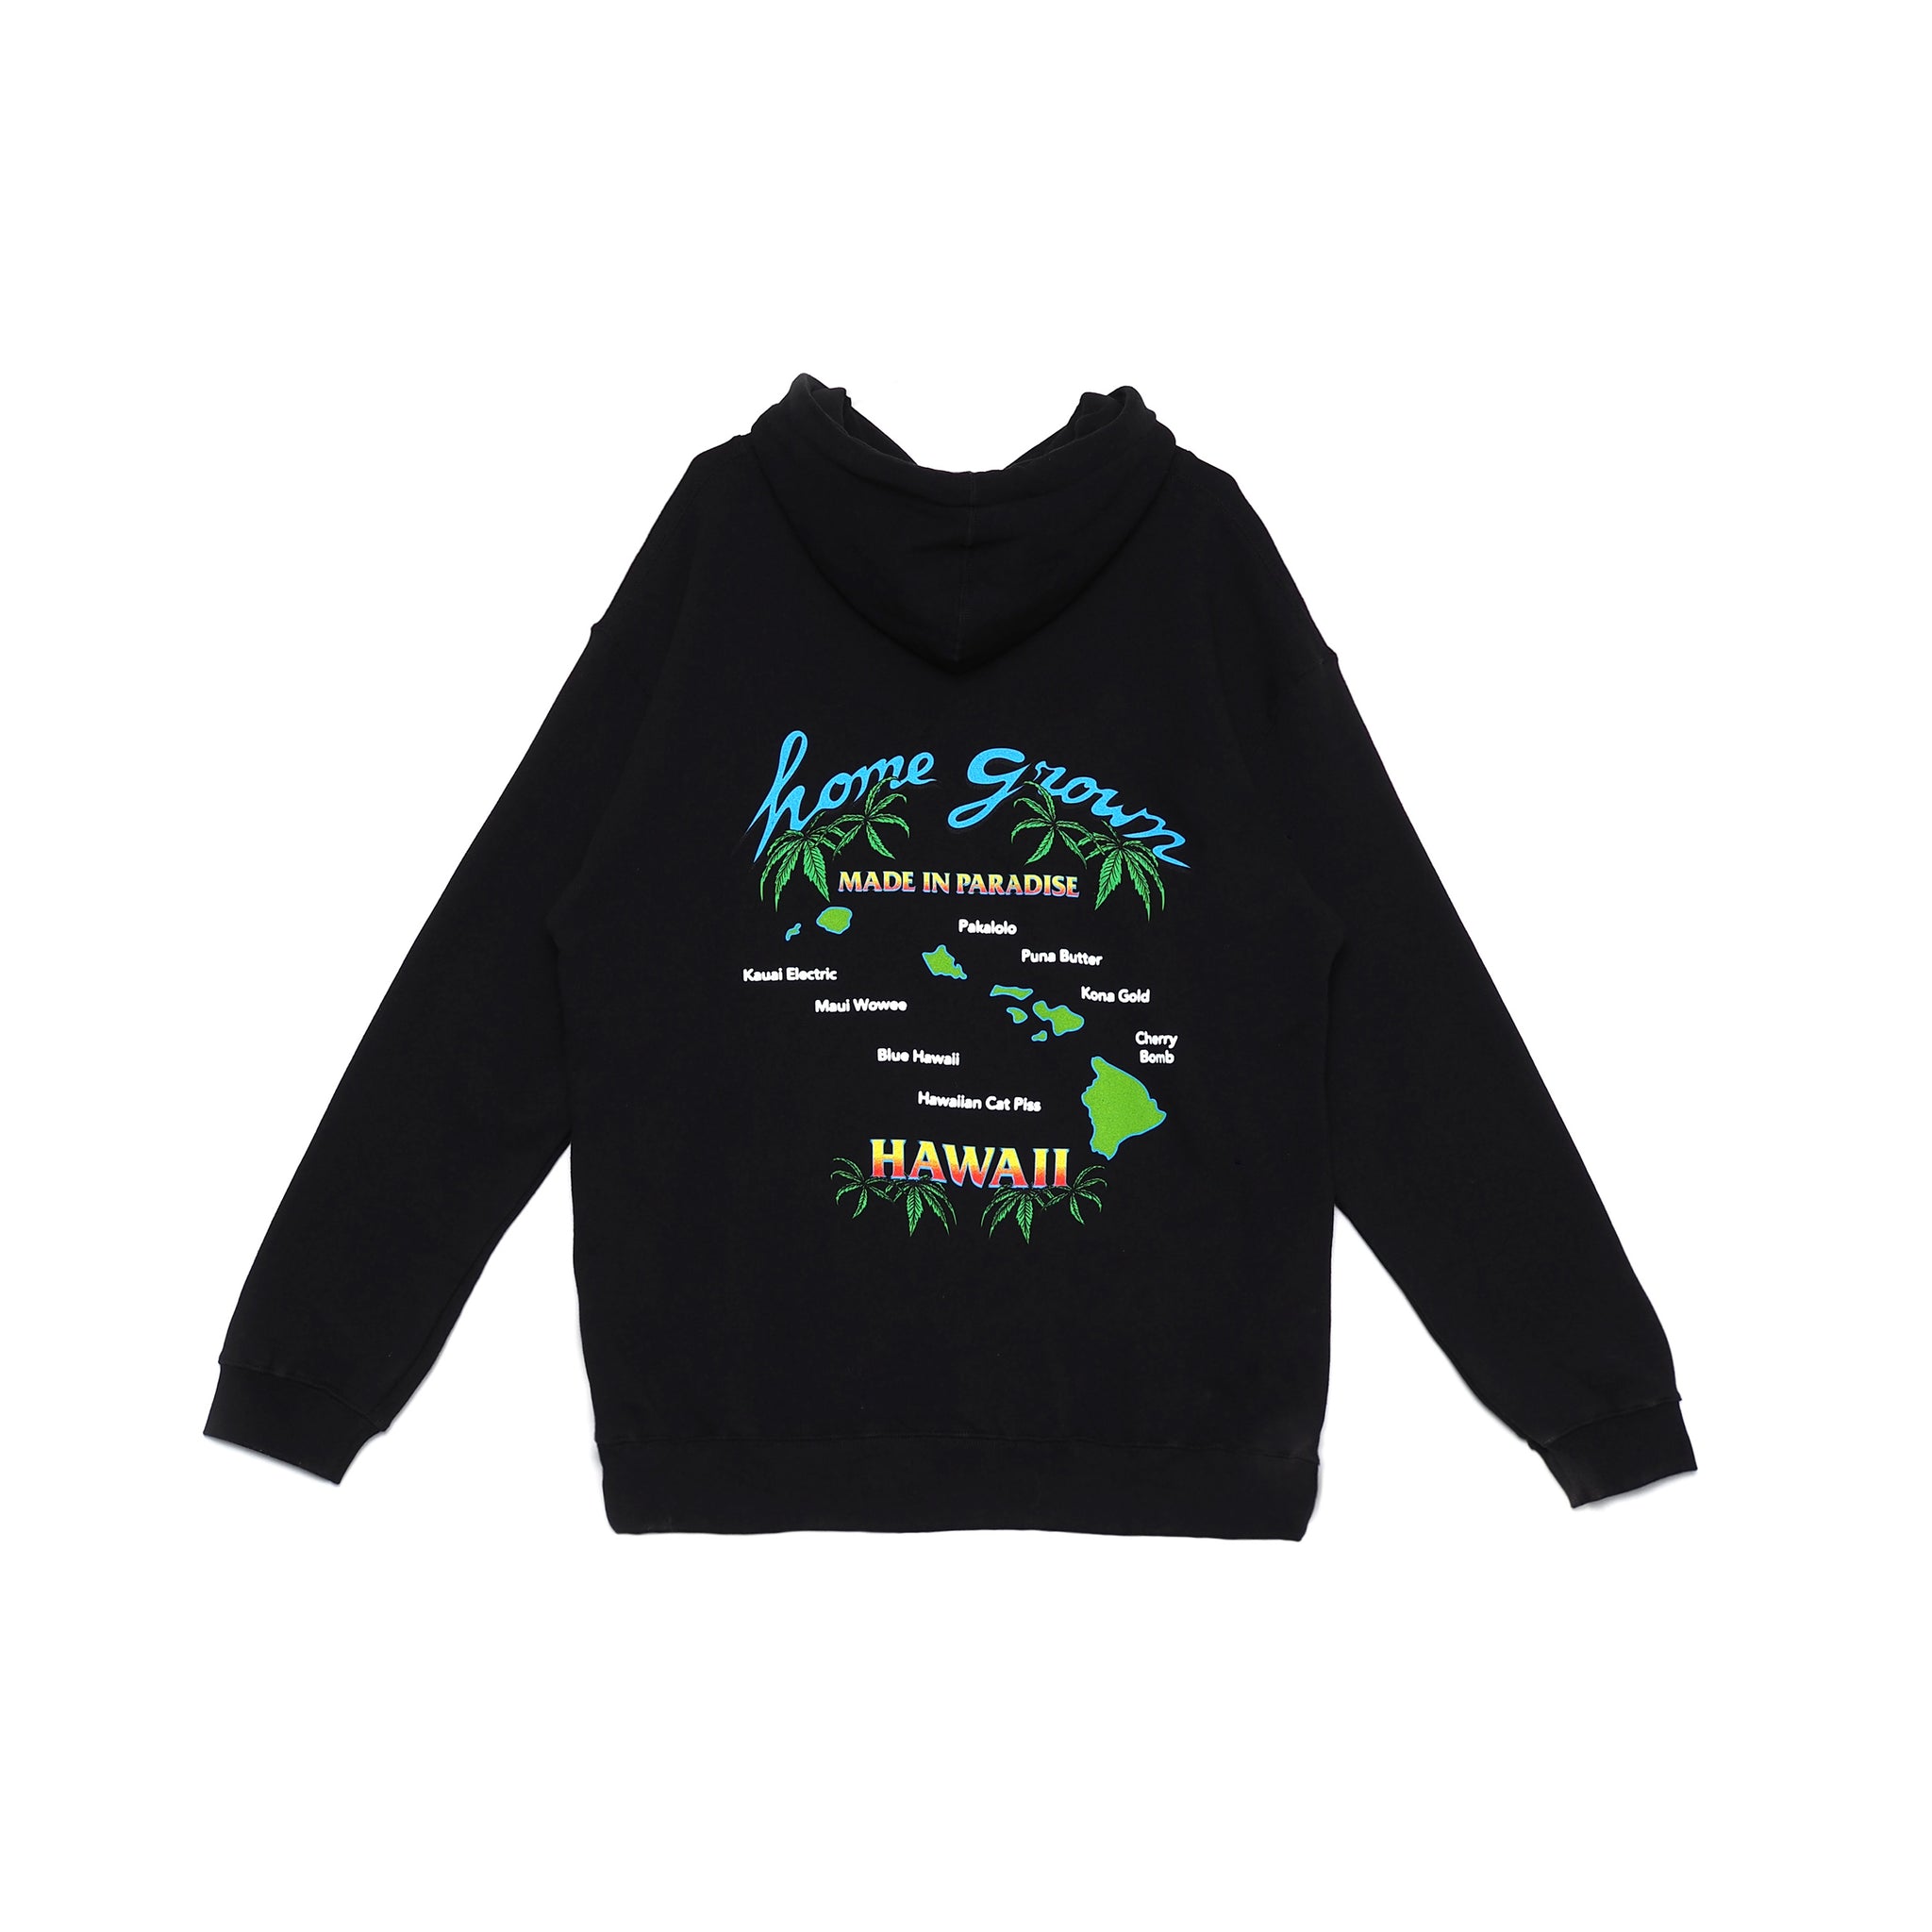 Back view of Made in Paradise Homegrown Collection "HOME GROWN" black hoodie